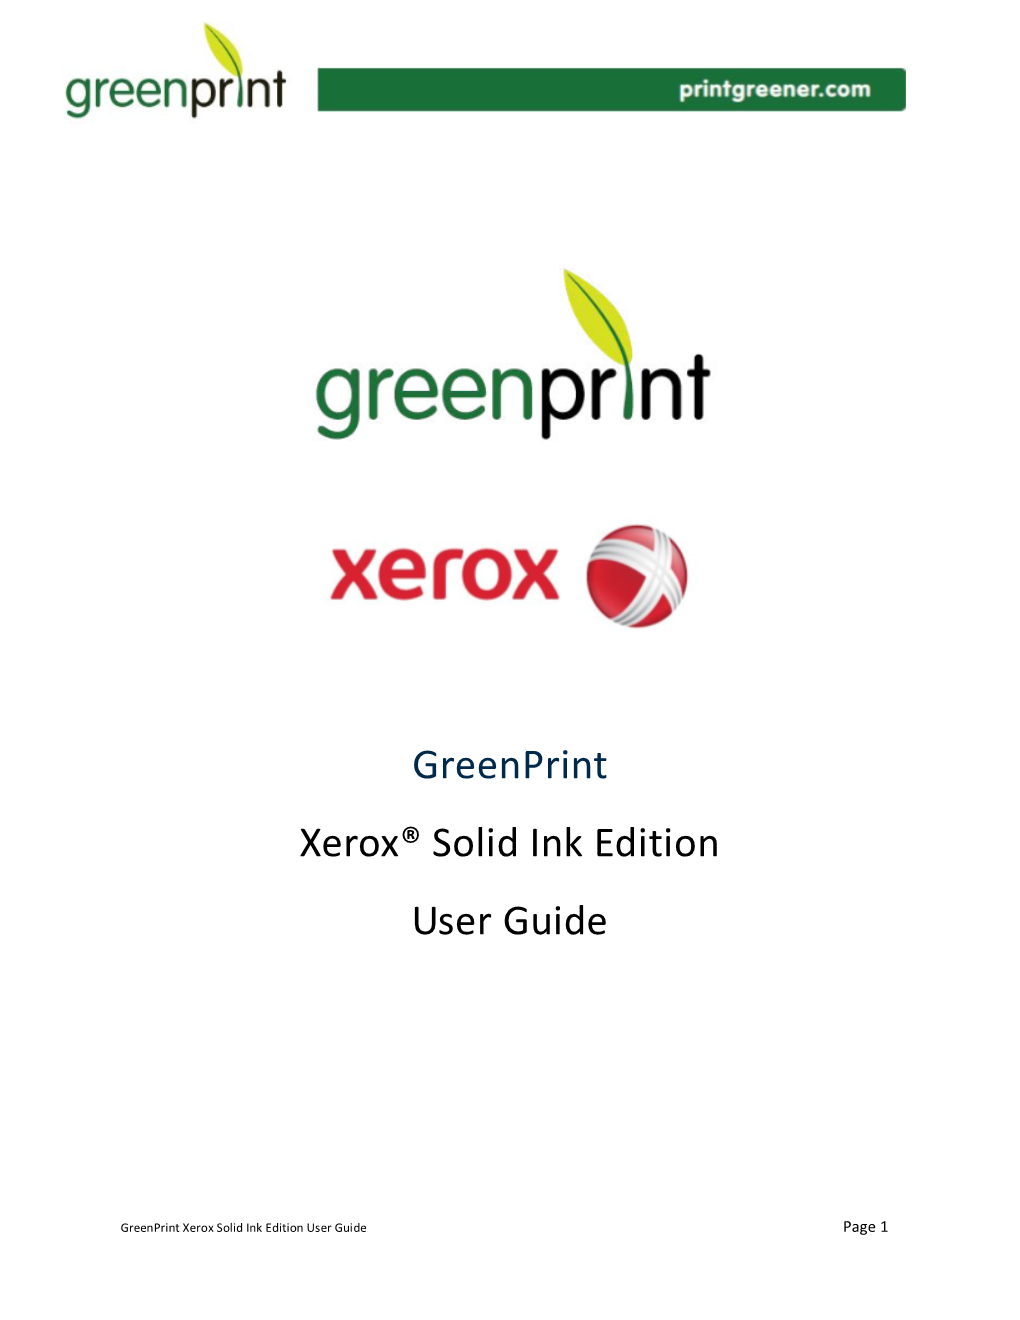 Greenprint Xerox® Solid Ink Edition User Guide